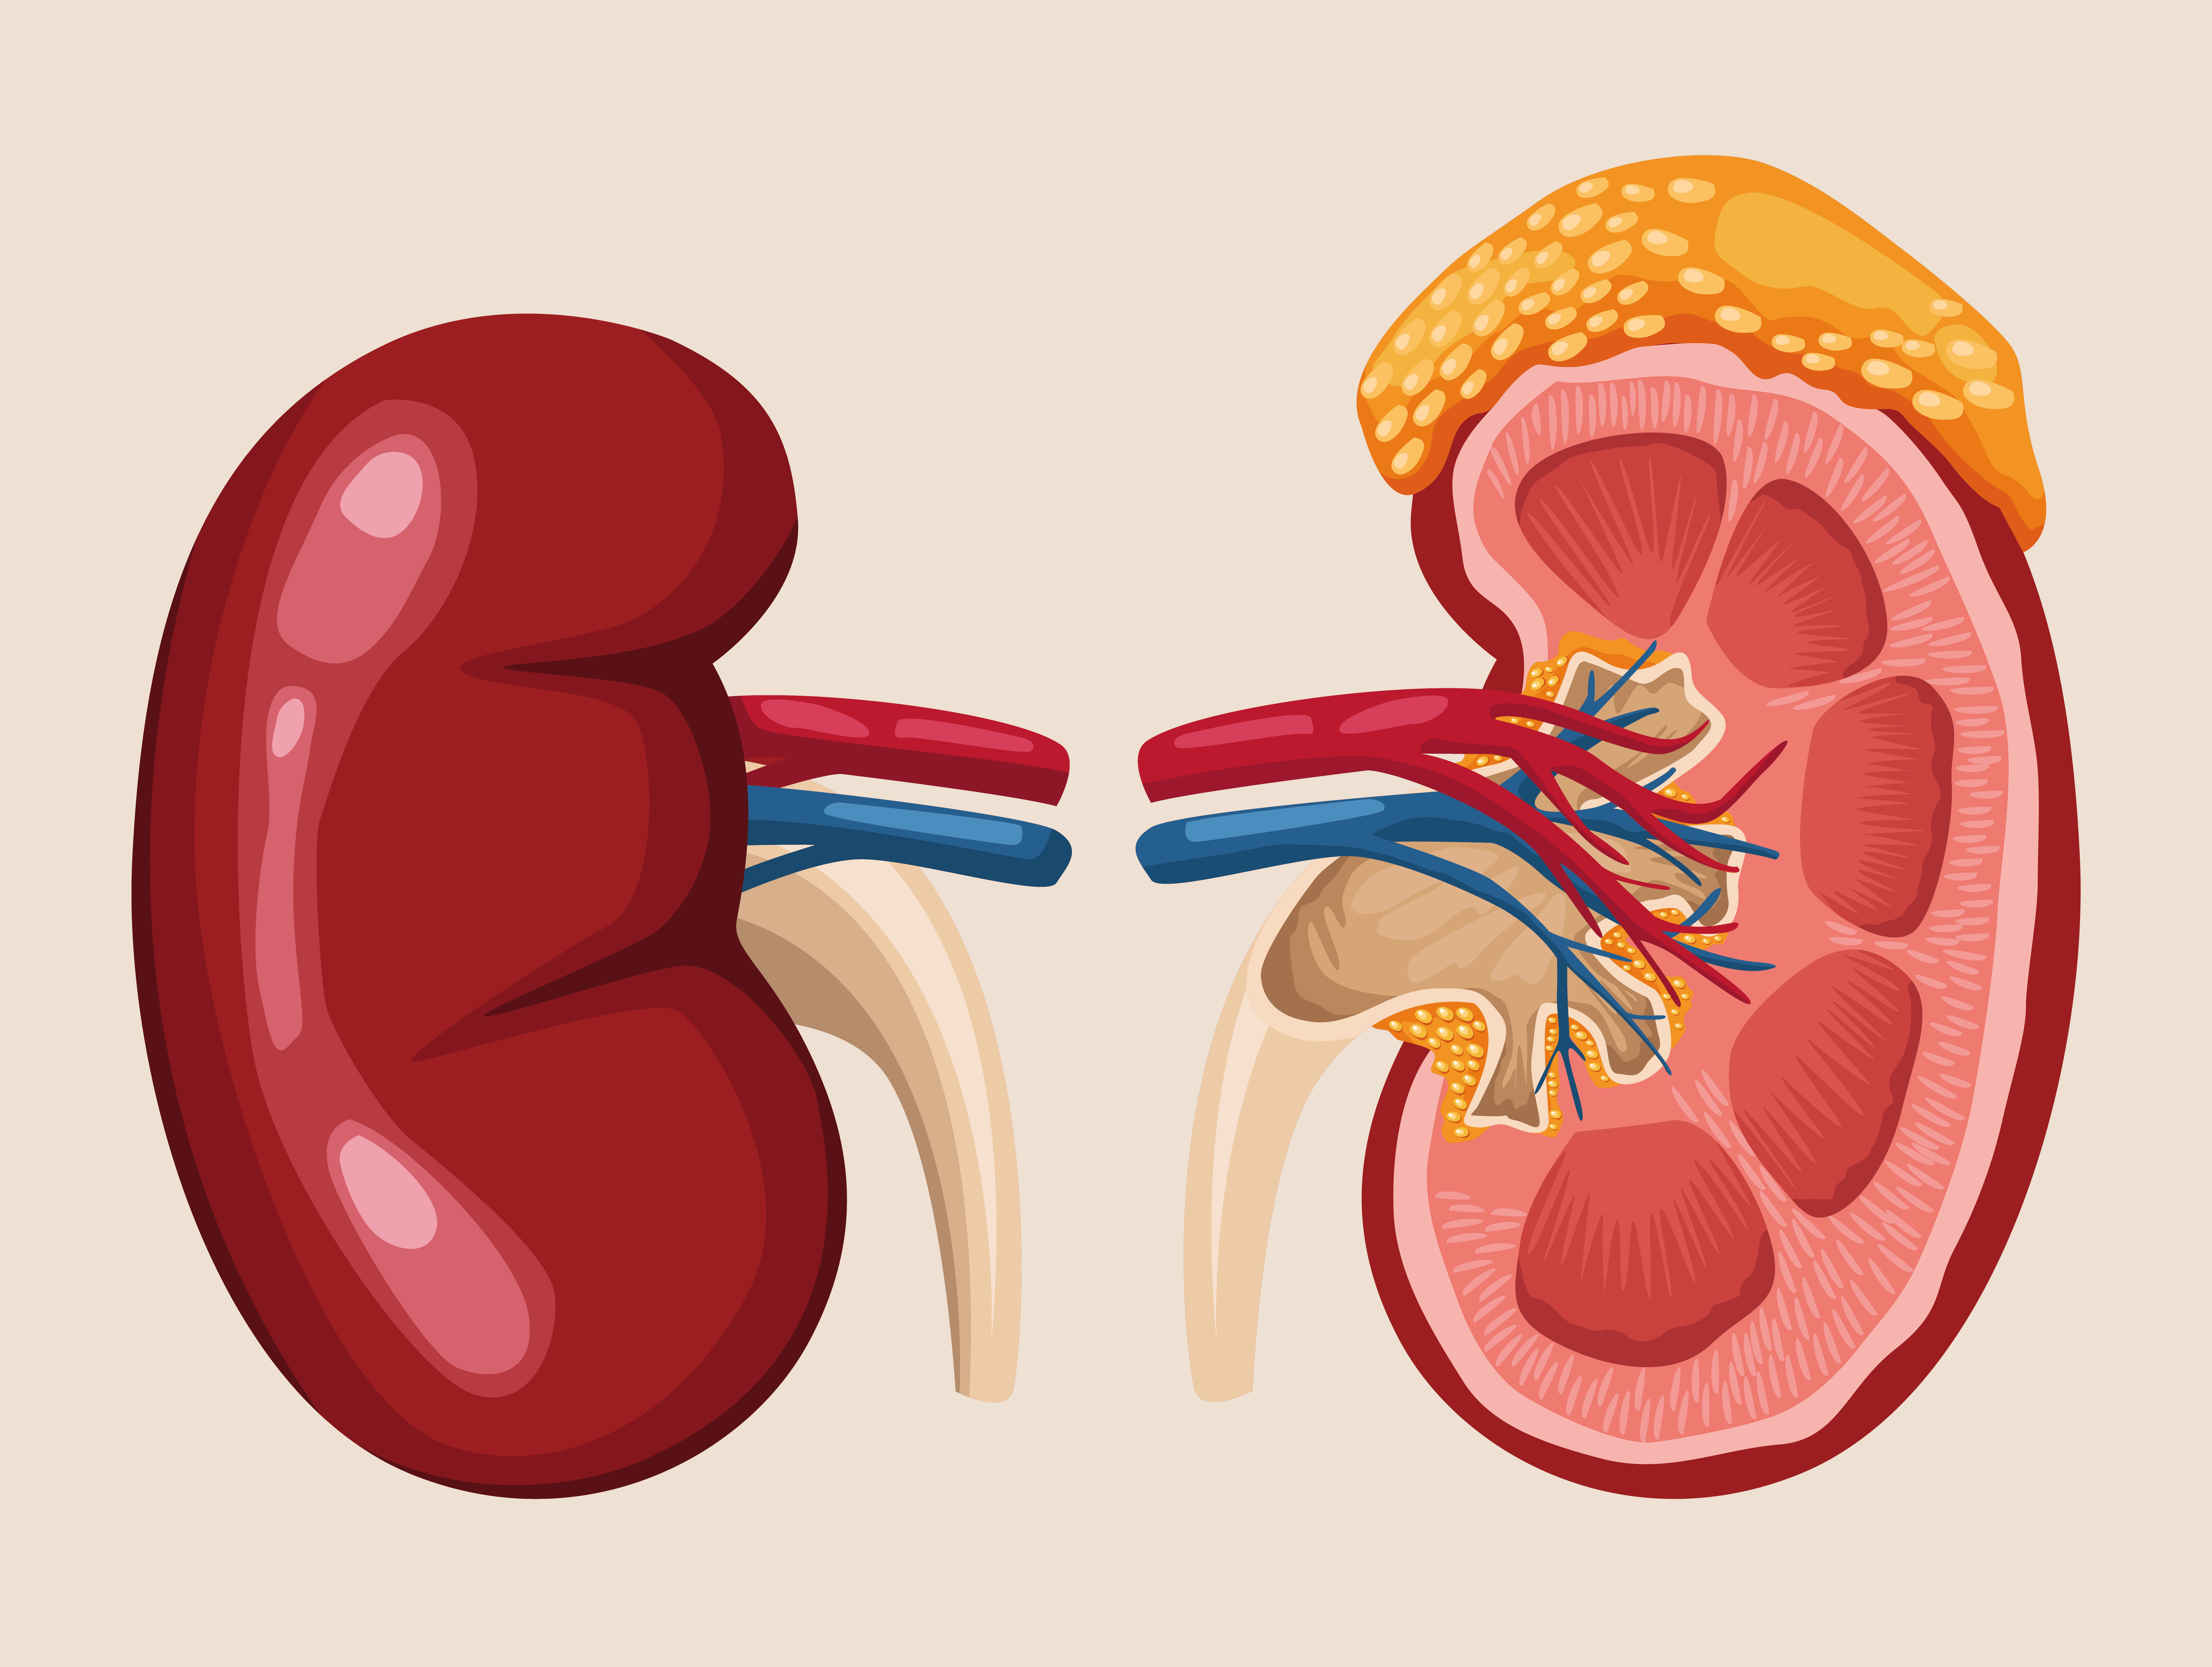 7 Vital Health and Wellness Tips for Detecting Kidney Disease Early